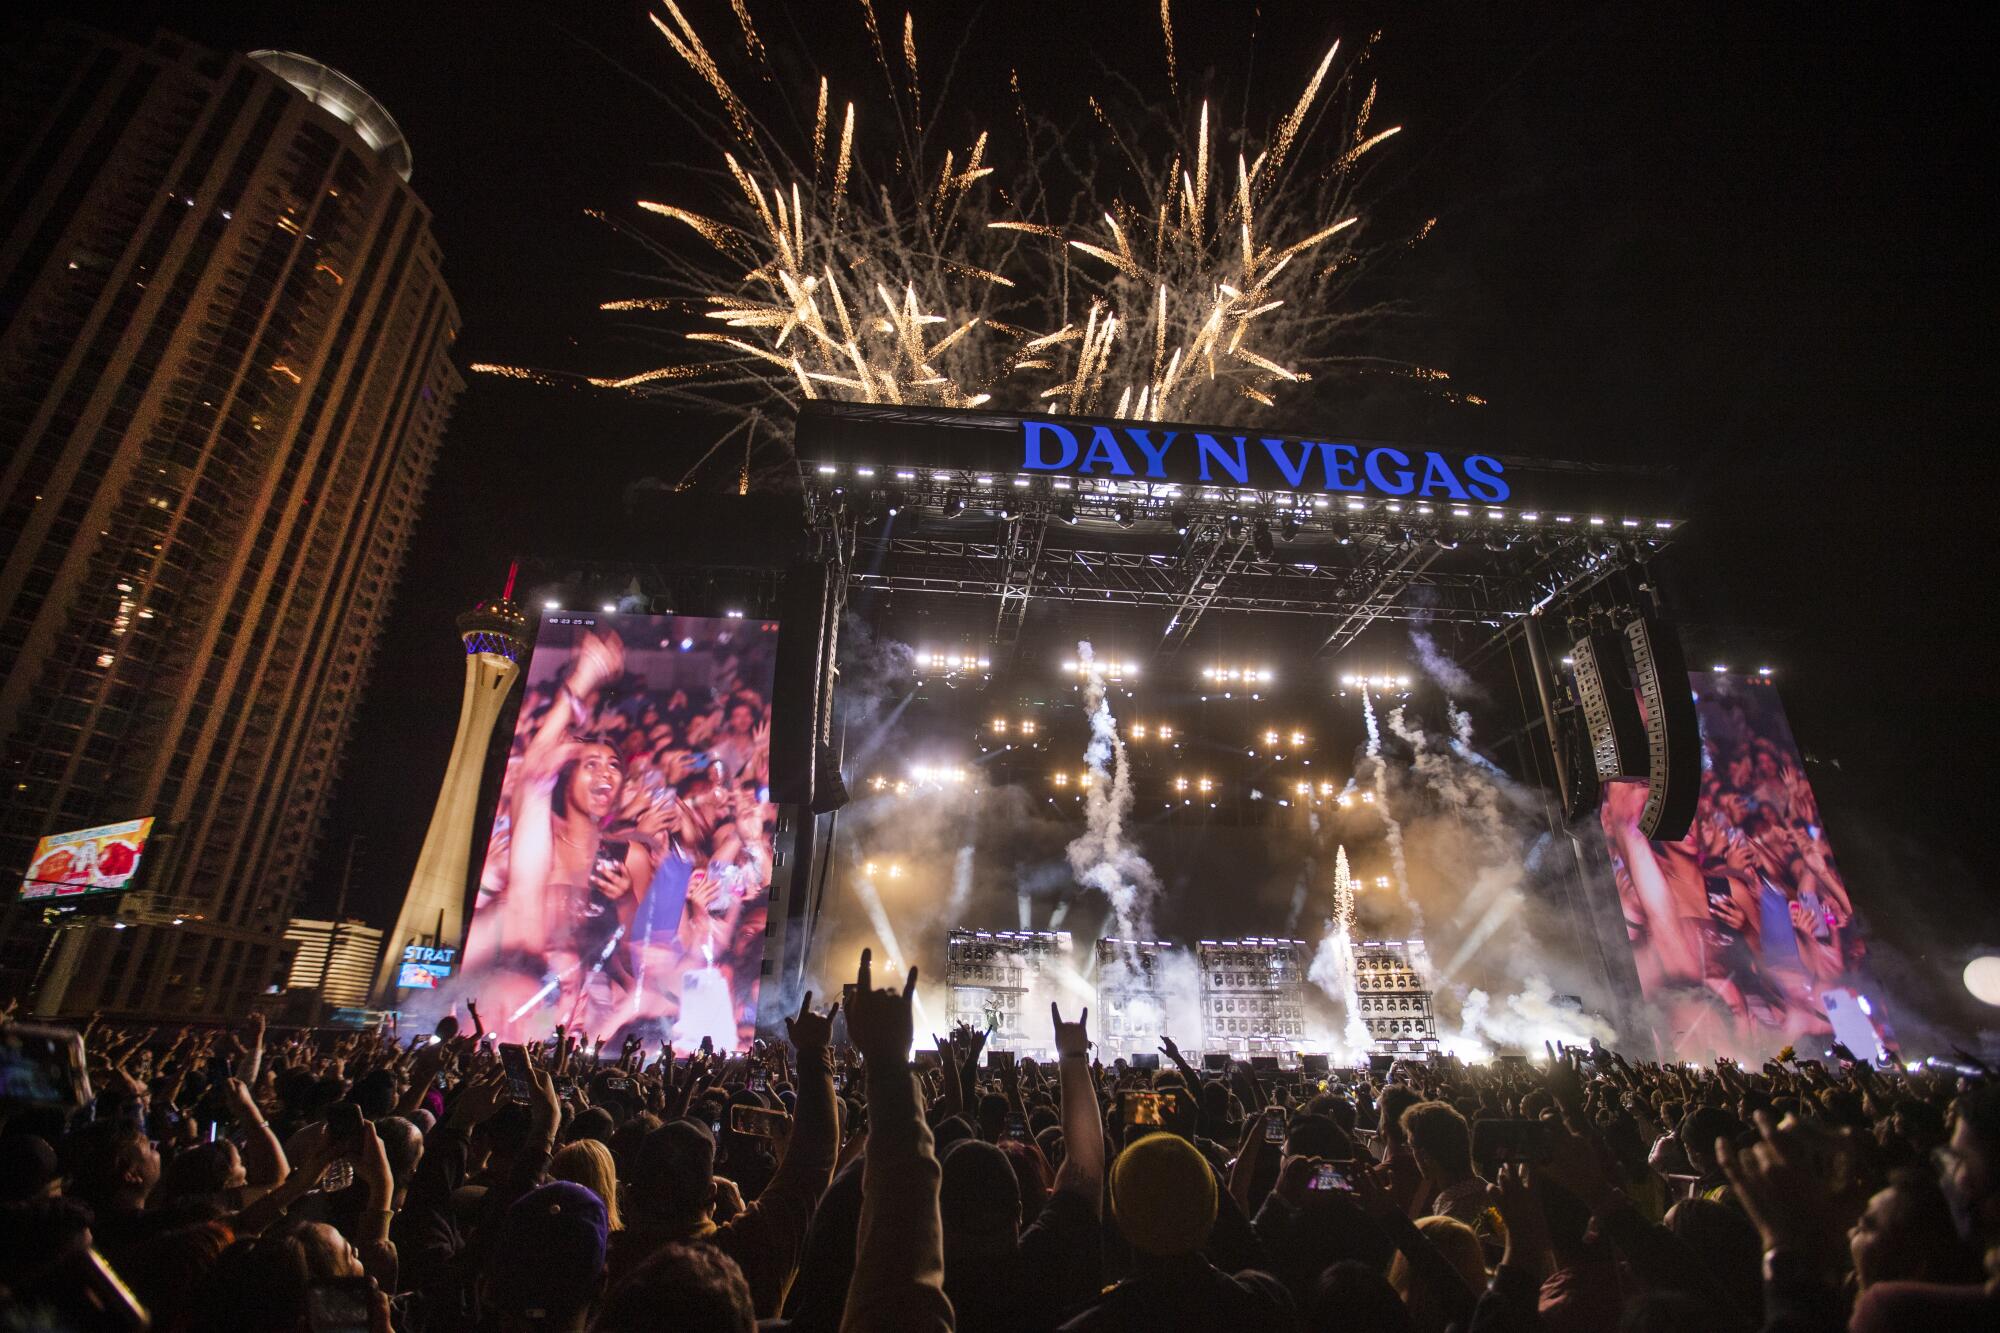 Fireworks explode behind a stage with a giant "Day N Night Vegas" sign